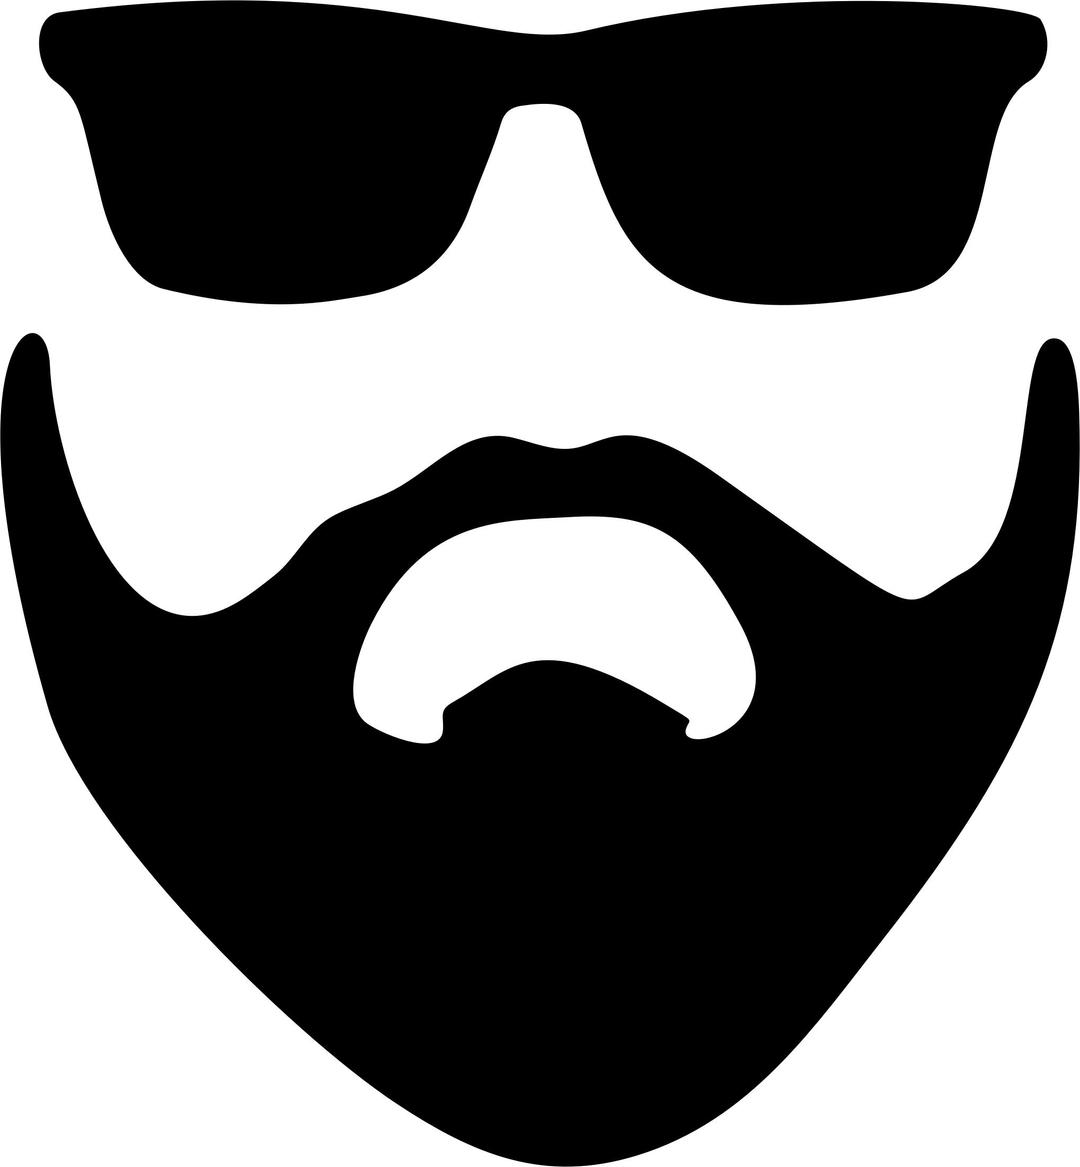 Beard And Sunglasses Silhouette png transparent